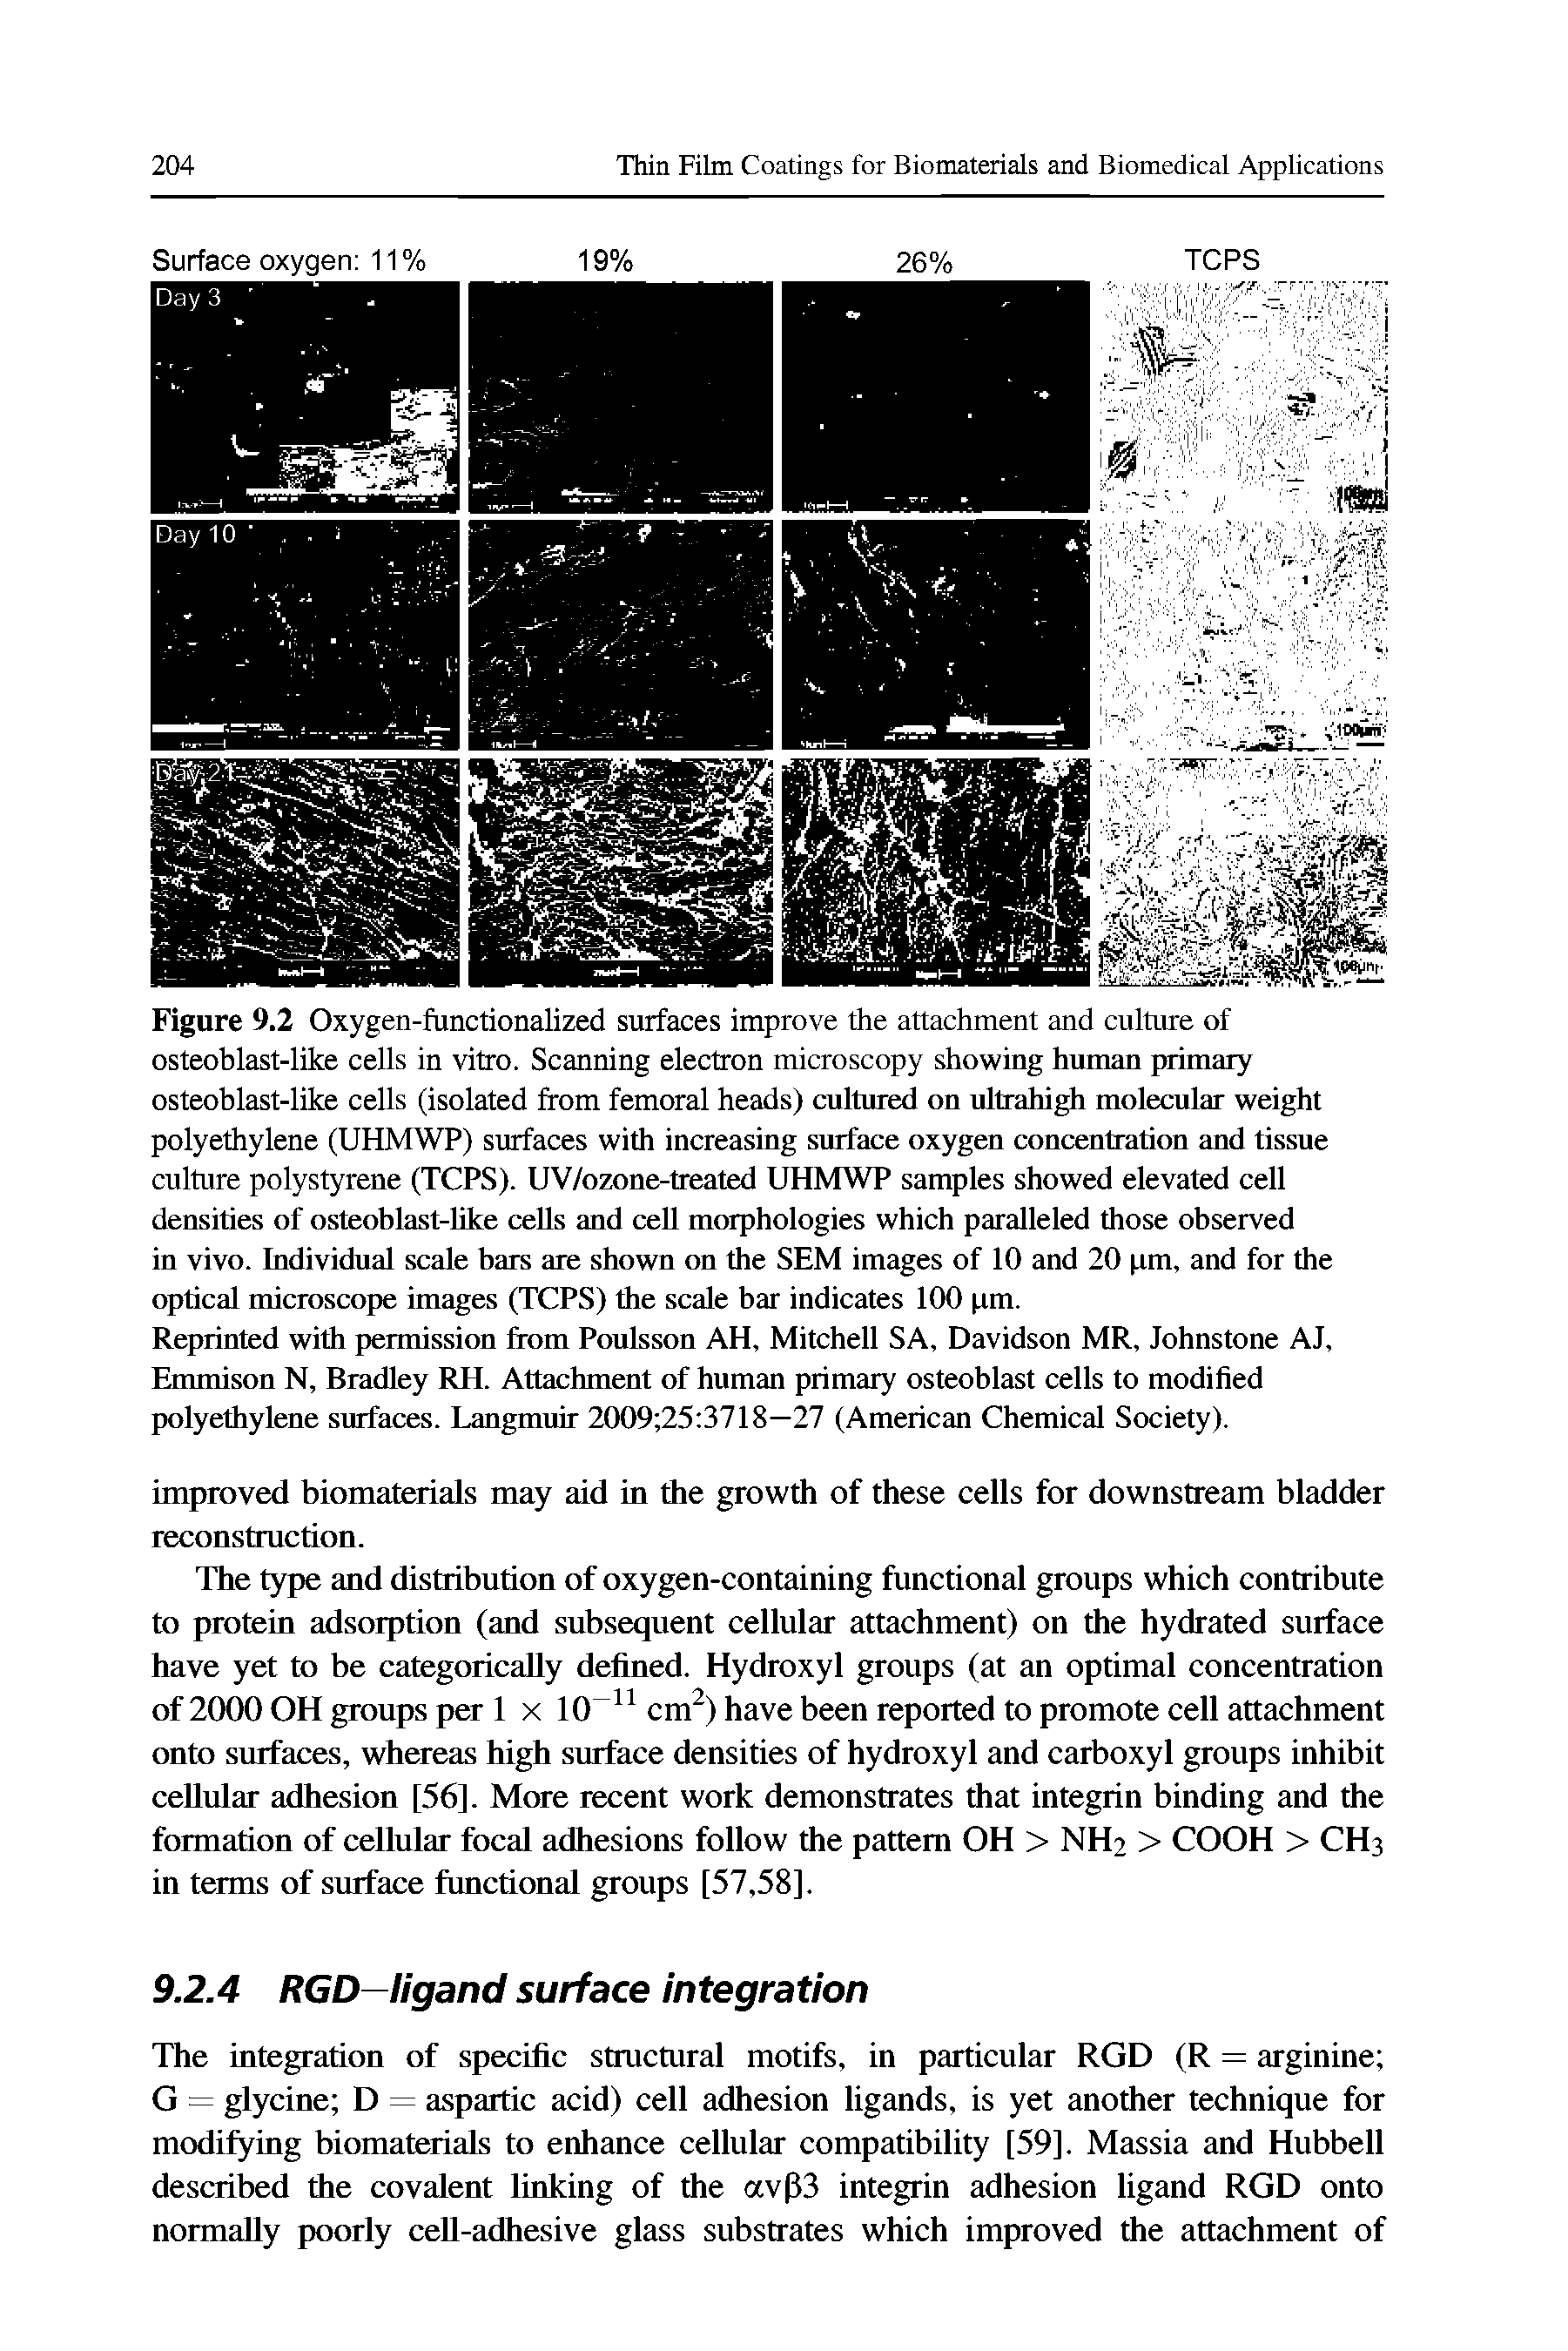 Figure 9.2 Oxygen-functionalized surfaces improve the attachment and culture of osteoblast-like cells in vitro. Scanning electron microscopy showing human primary osteoblast-like cells (isolated from femoral heads) cultured on ultrahigh molecular weight polyethylene (UHMWP) surfaces with increasing surface oxygen concentration and tissue culture polystyrene (TCPS). UV/ozone-treated UHMWP samples showed elevated cell densities of osteoblast-Mke cells and cell morphologies which paralleled those observed in vivo. Individual scale bars are shown on the SEM images of 10 and 20 pm, and for the optical microscope images (TCPS) the scale bar indicates 100 pm.